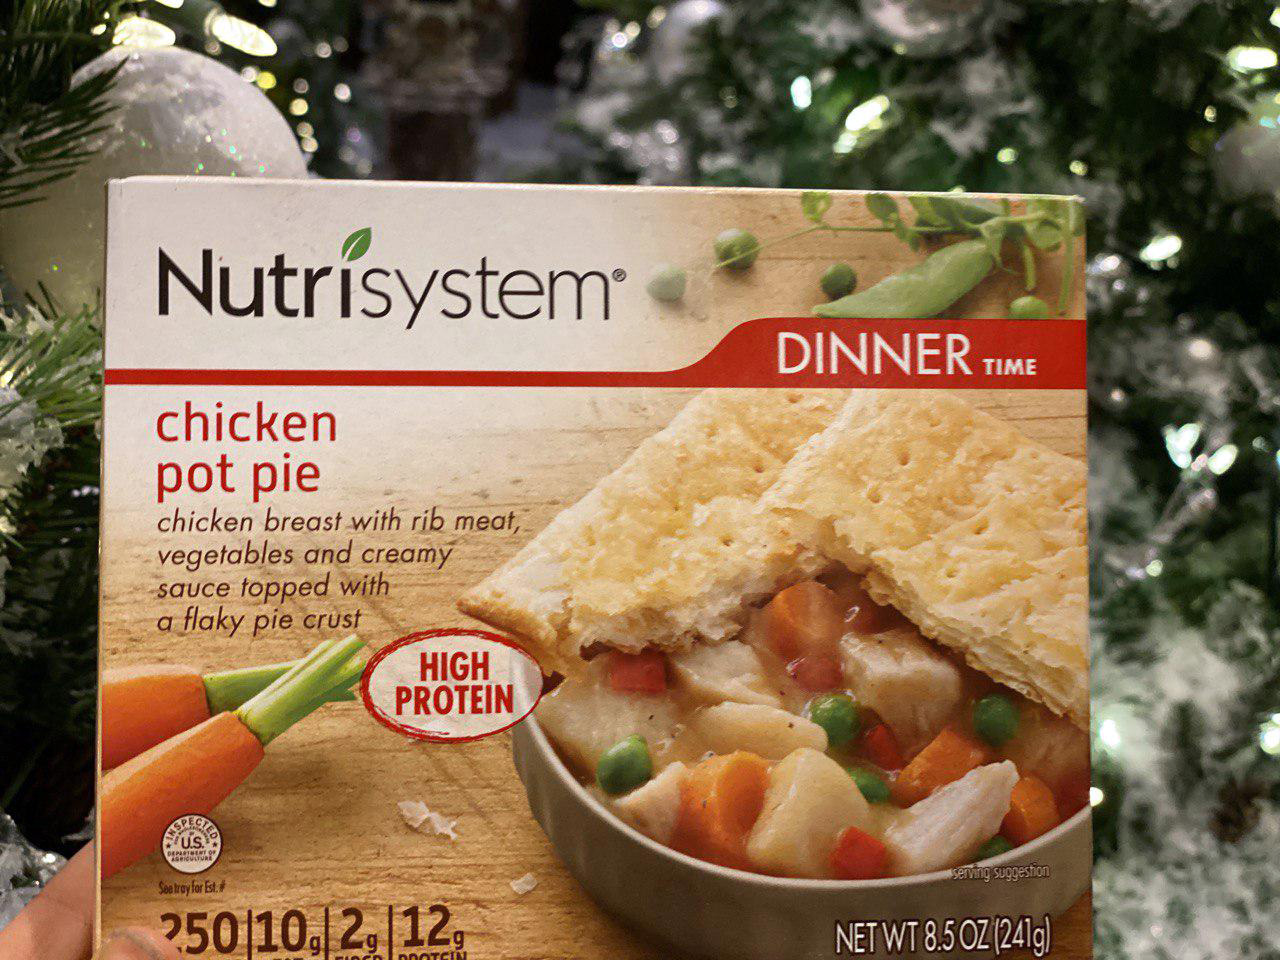 Dieting During Holidays with Nutrisystem